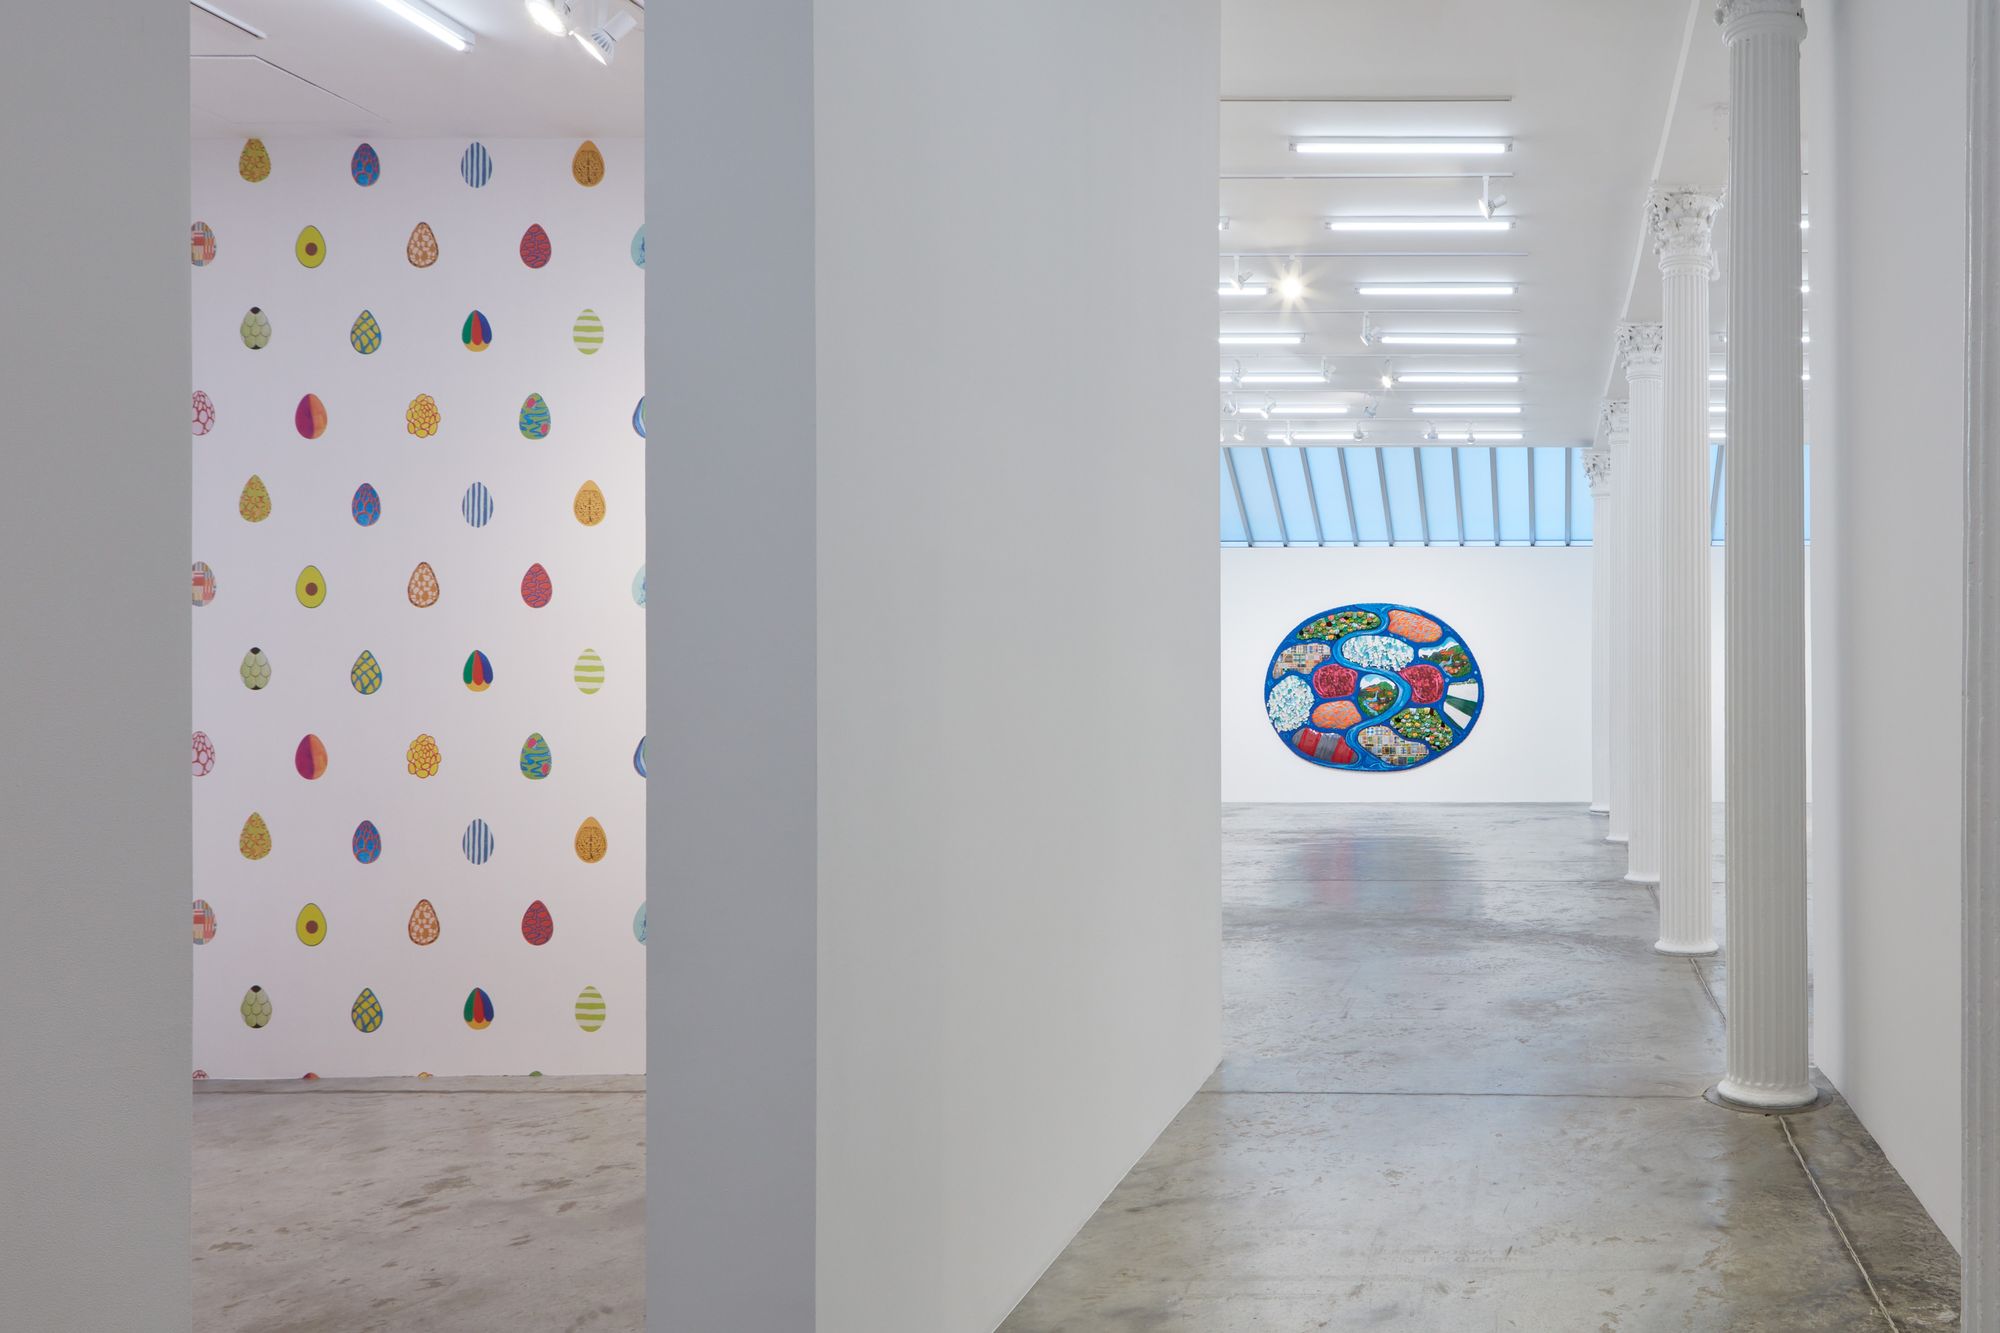 Installation view in white walled room with earth like sculpture in background and spotted wallpaper in foreground